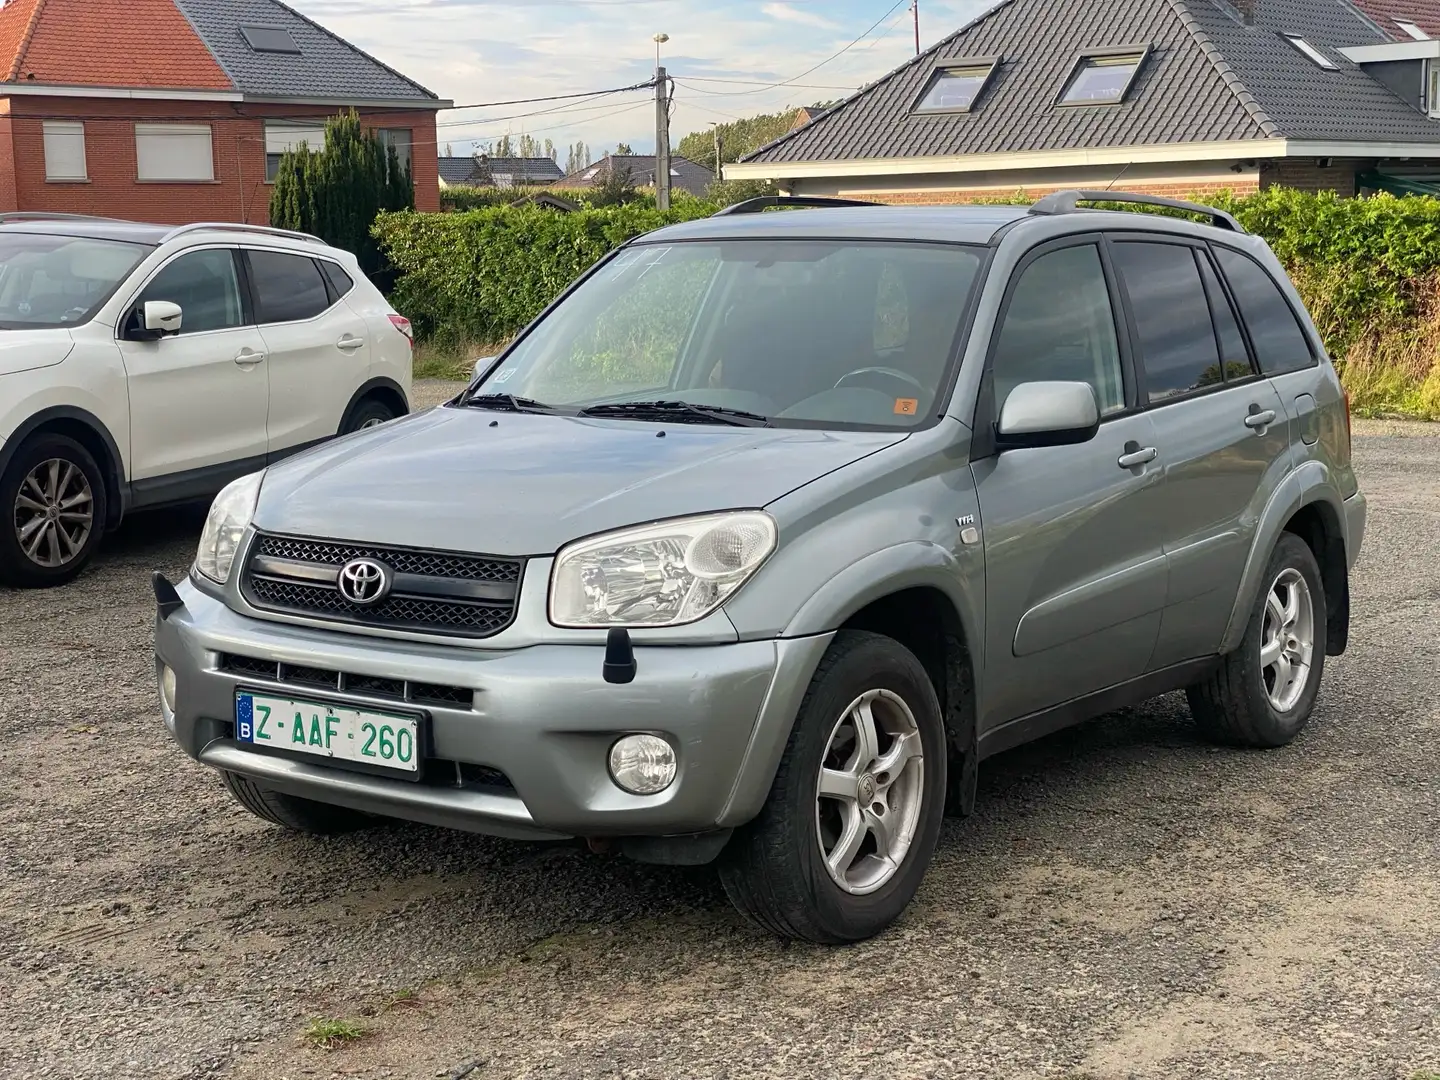 Toyota RAV 4 SUV4x4  Essence Climatise only to Africa Grigio - 1